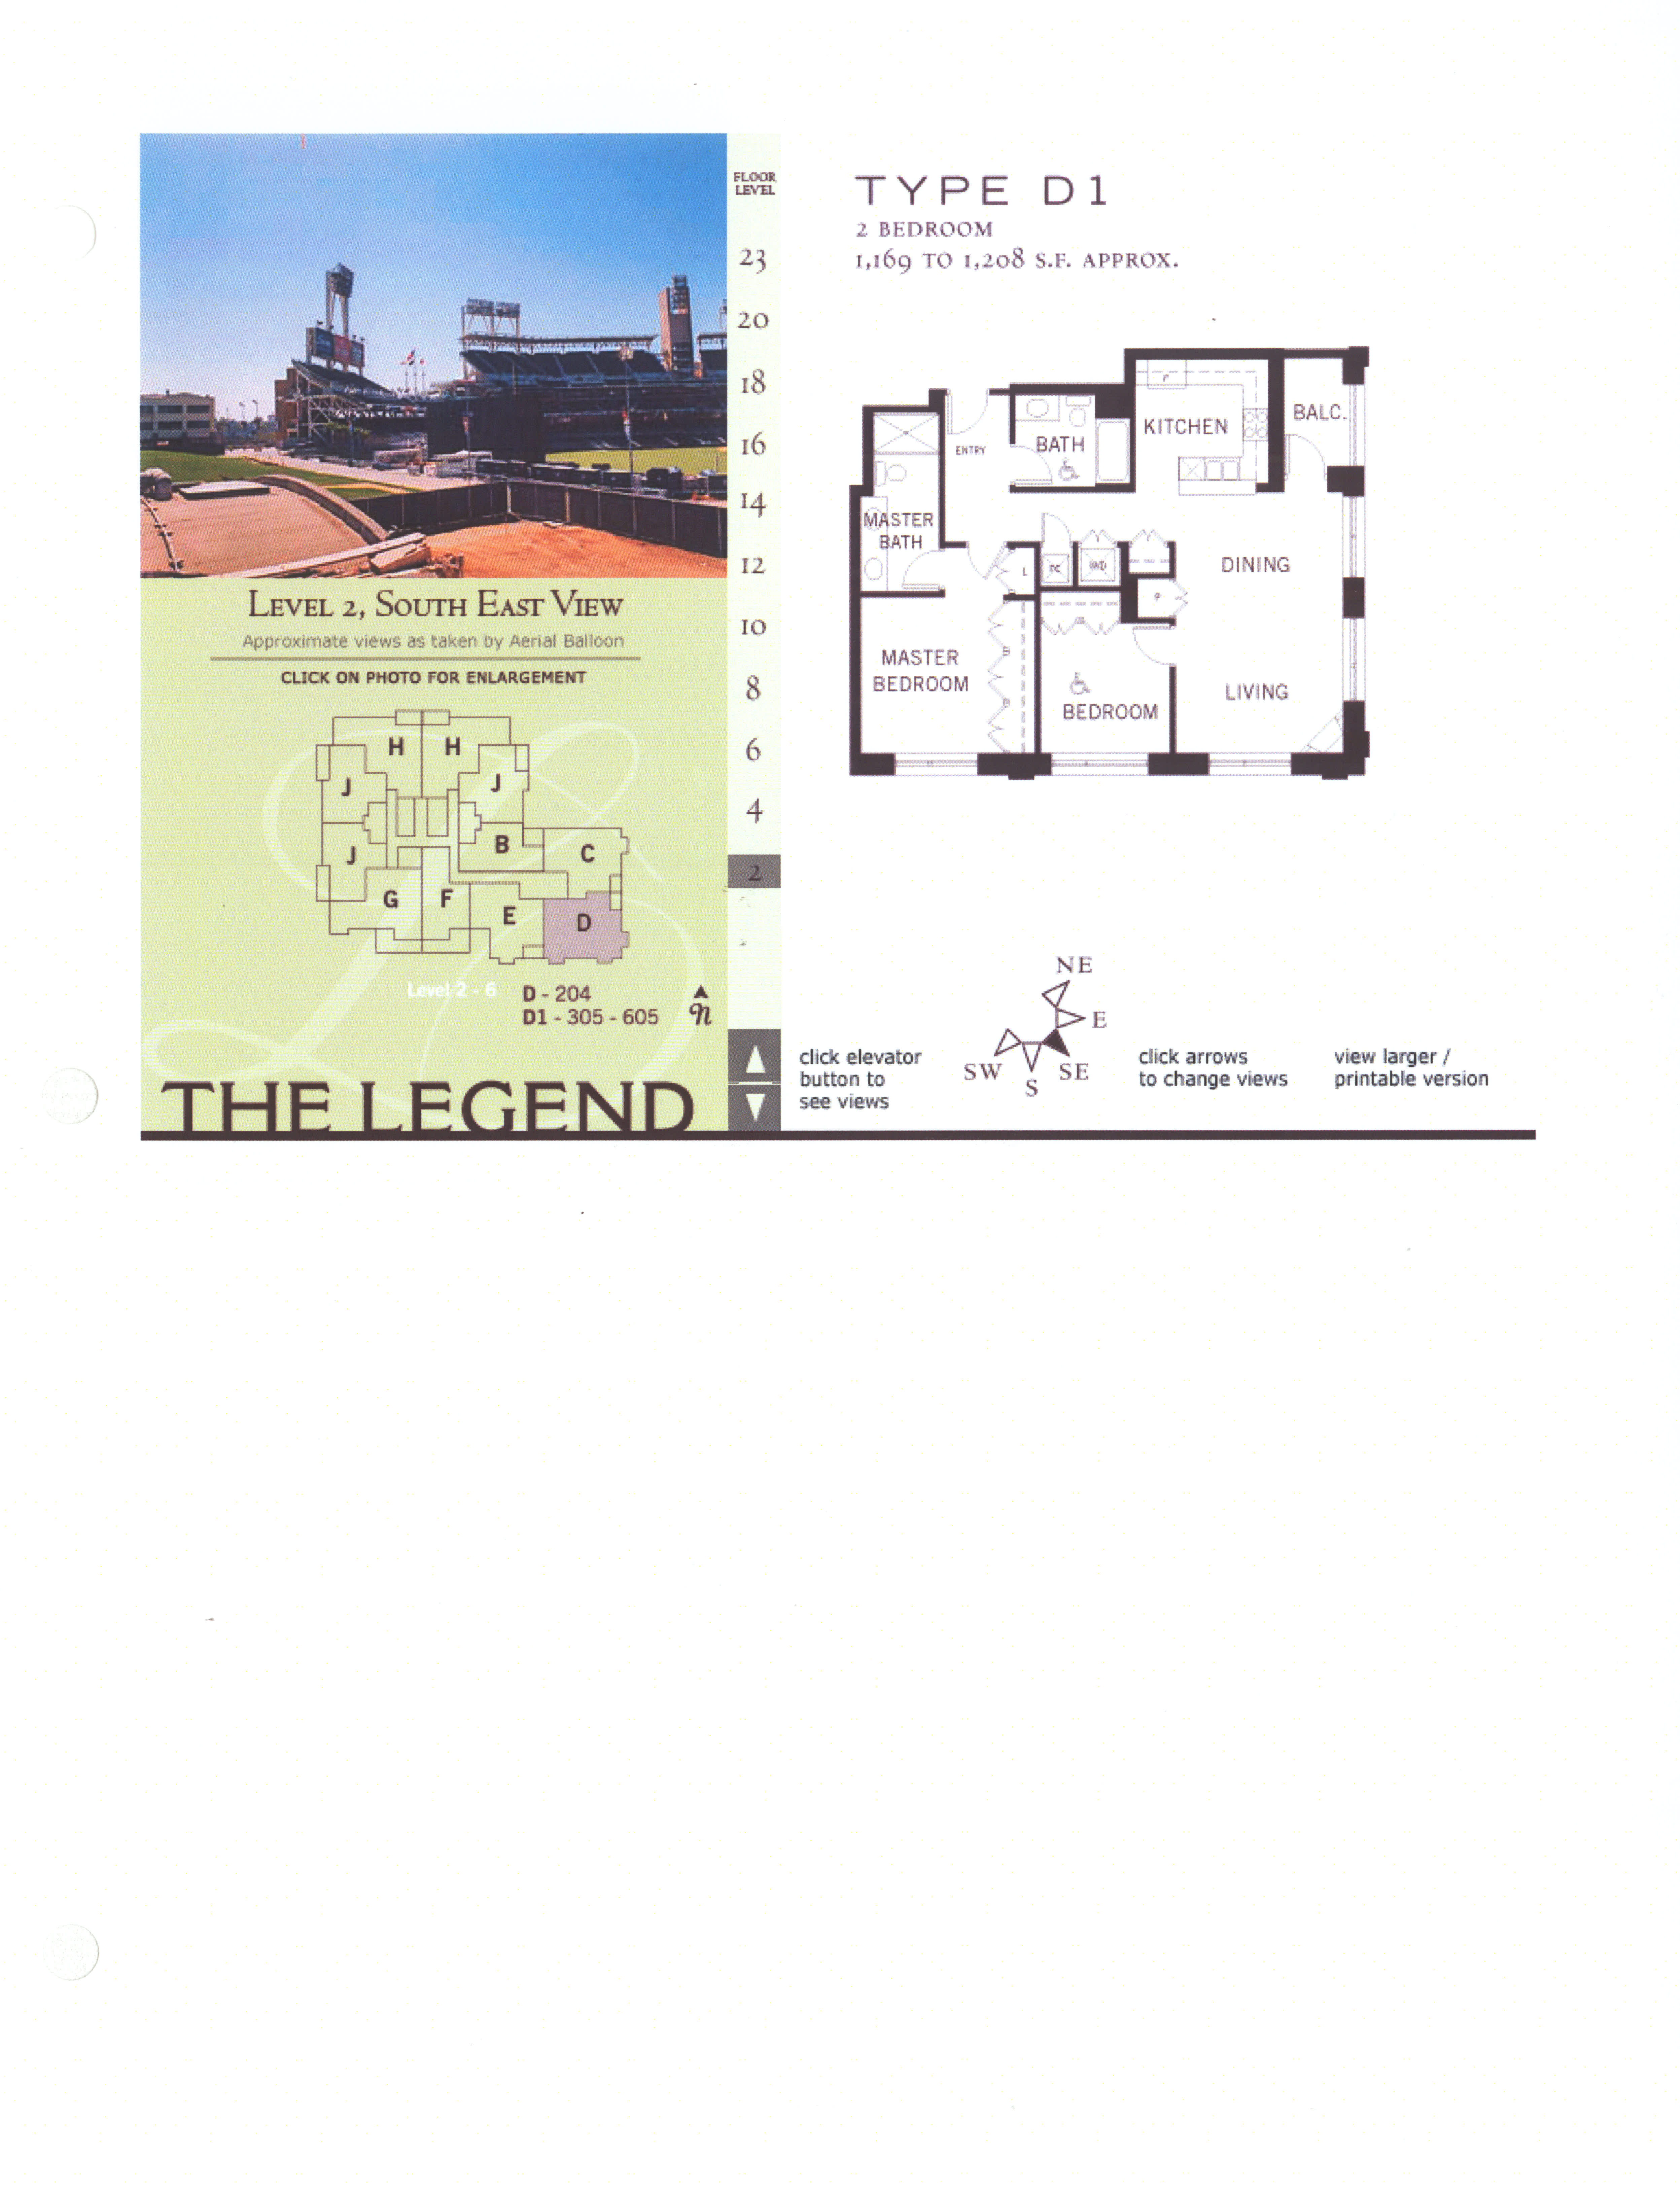 The Legend Floor Plan Level 2, South East View – Type D1